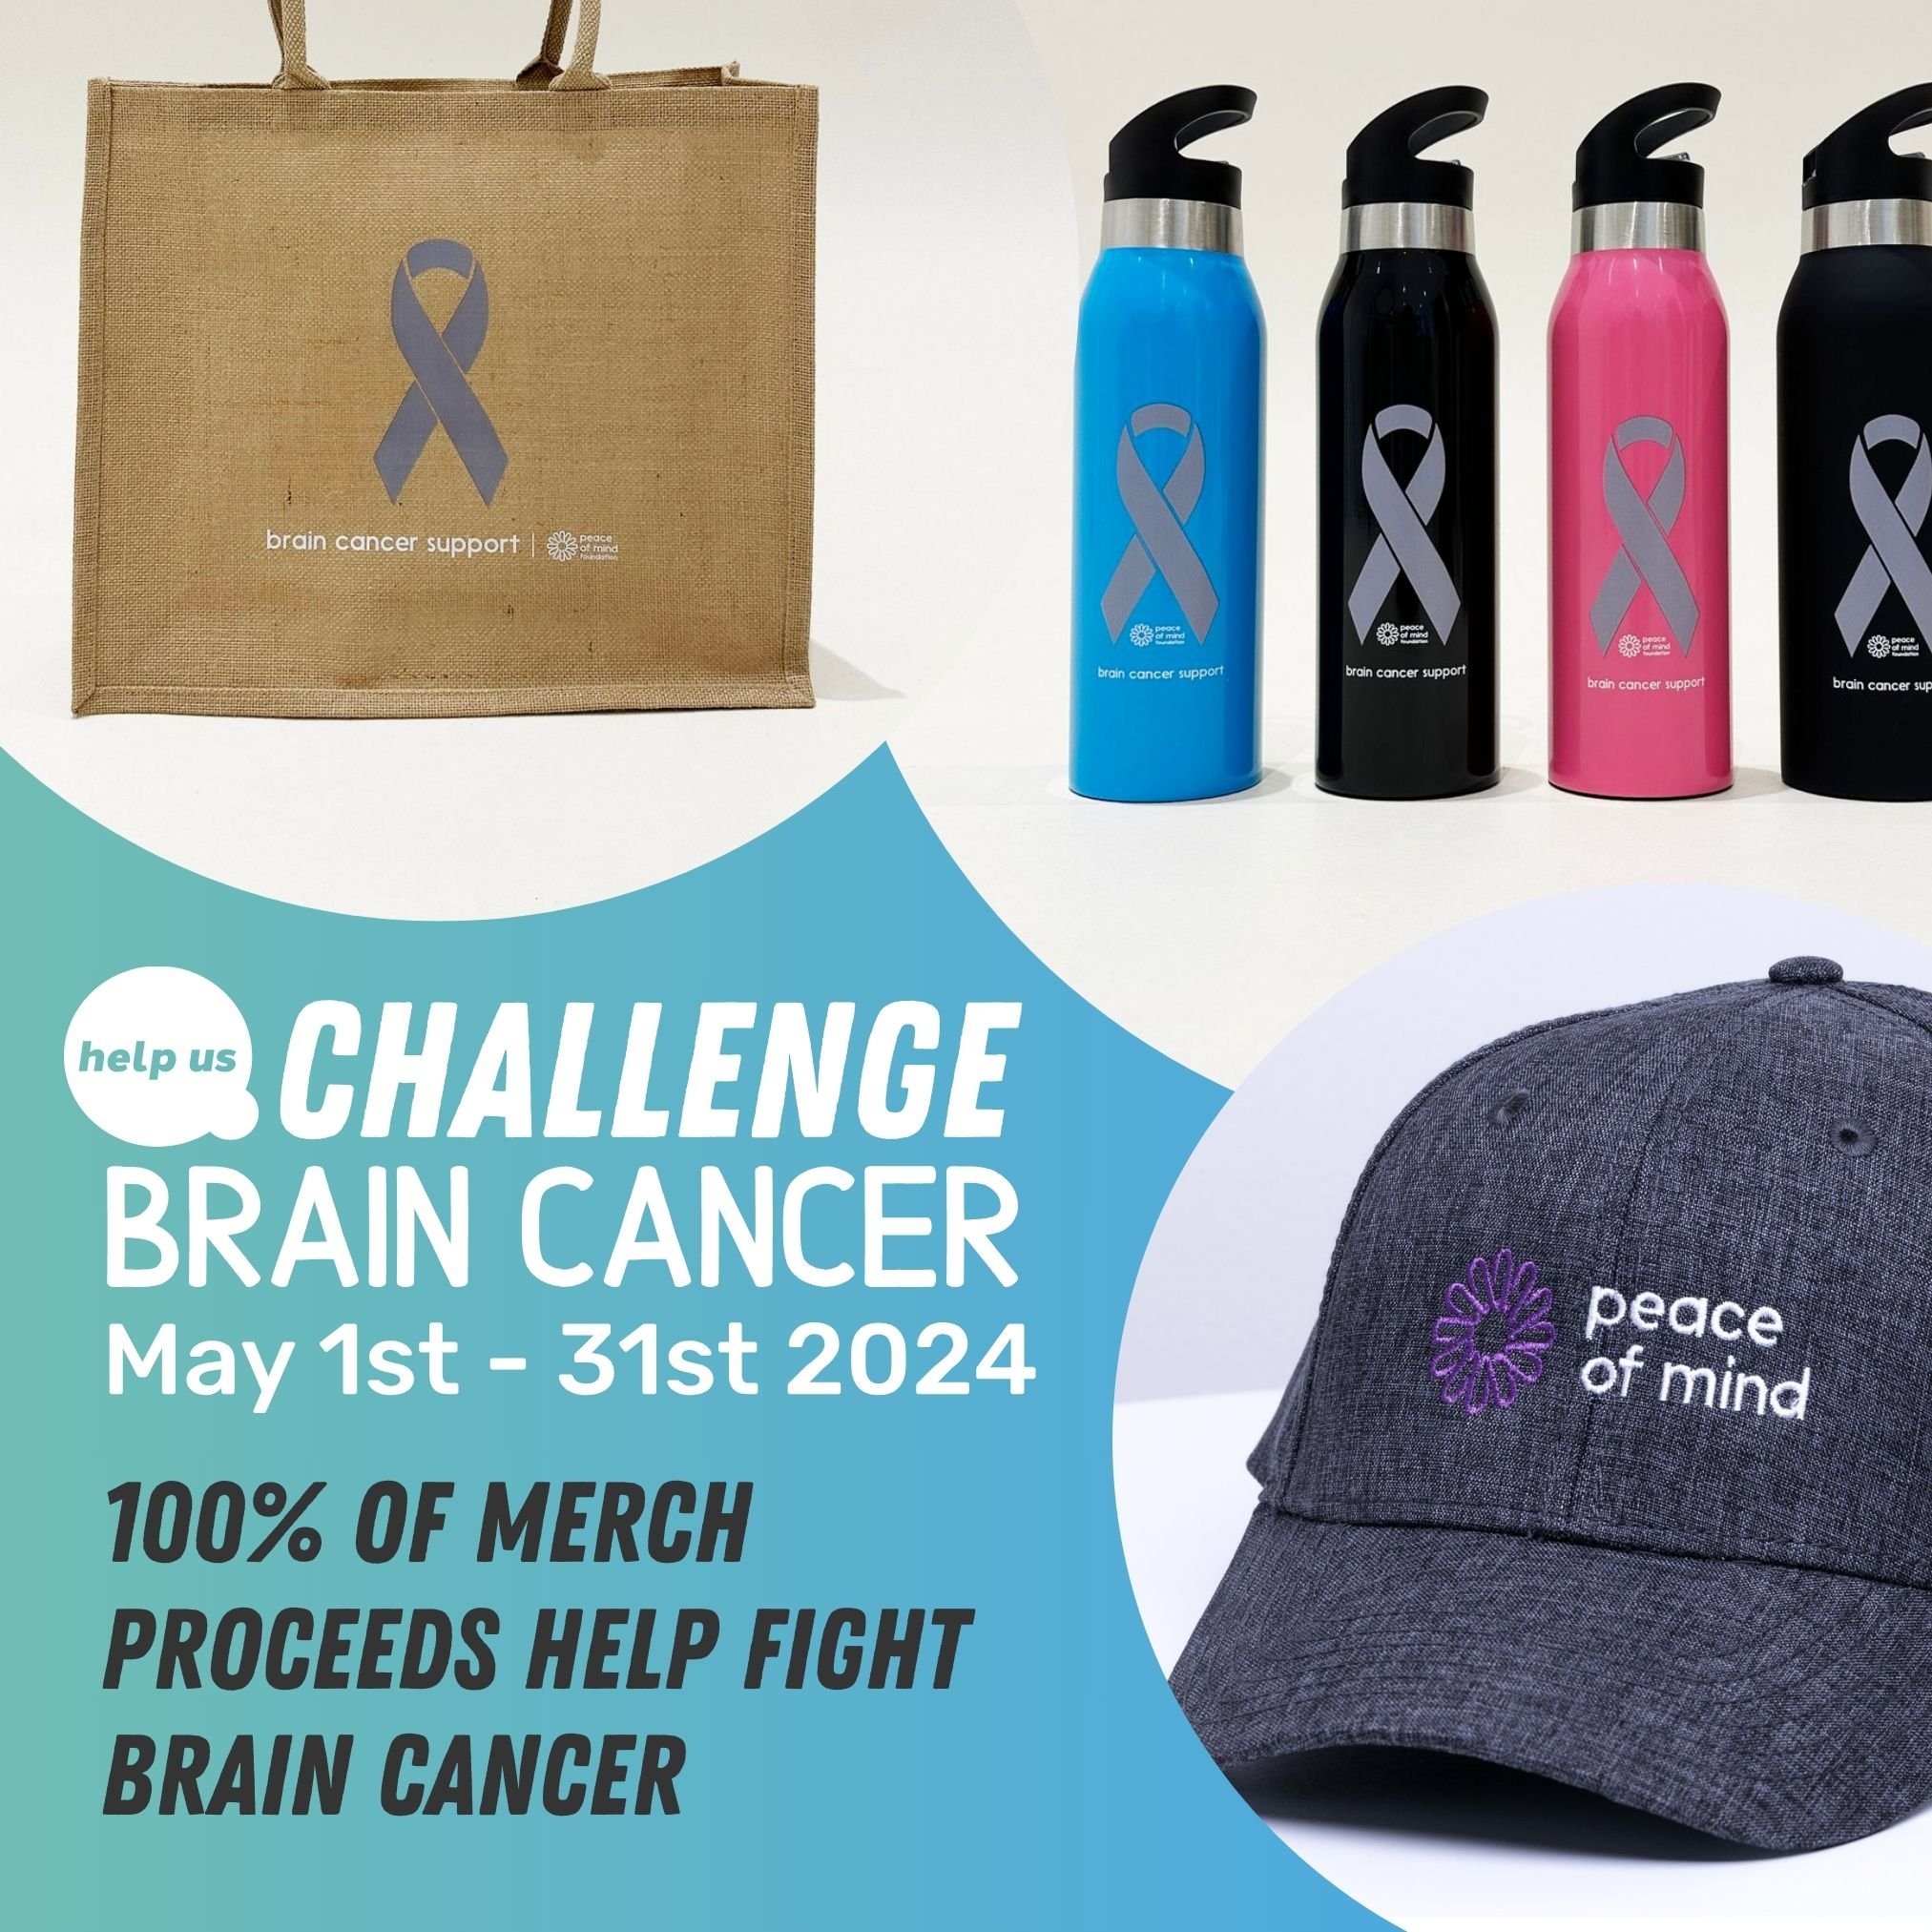 Not competing in Challenge Brain Cancer this May but still want to show your support? 100% of proceeds from every purchase in our online store go towards funding our vital brain tumour support programs for patients, carers, and families affected by a